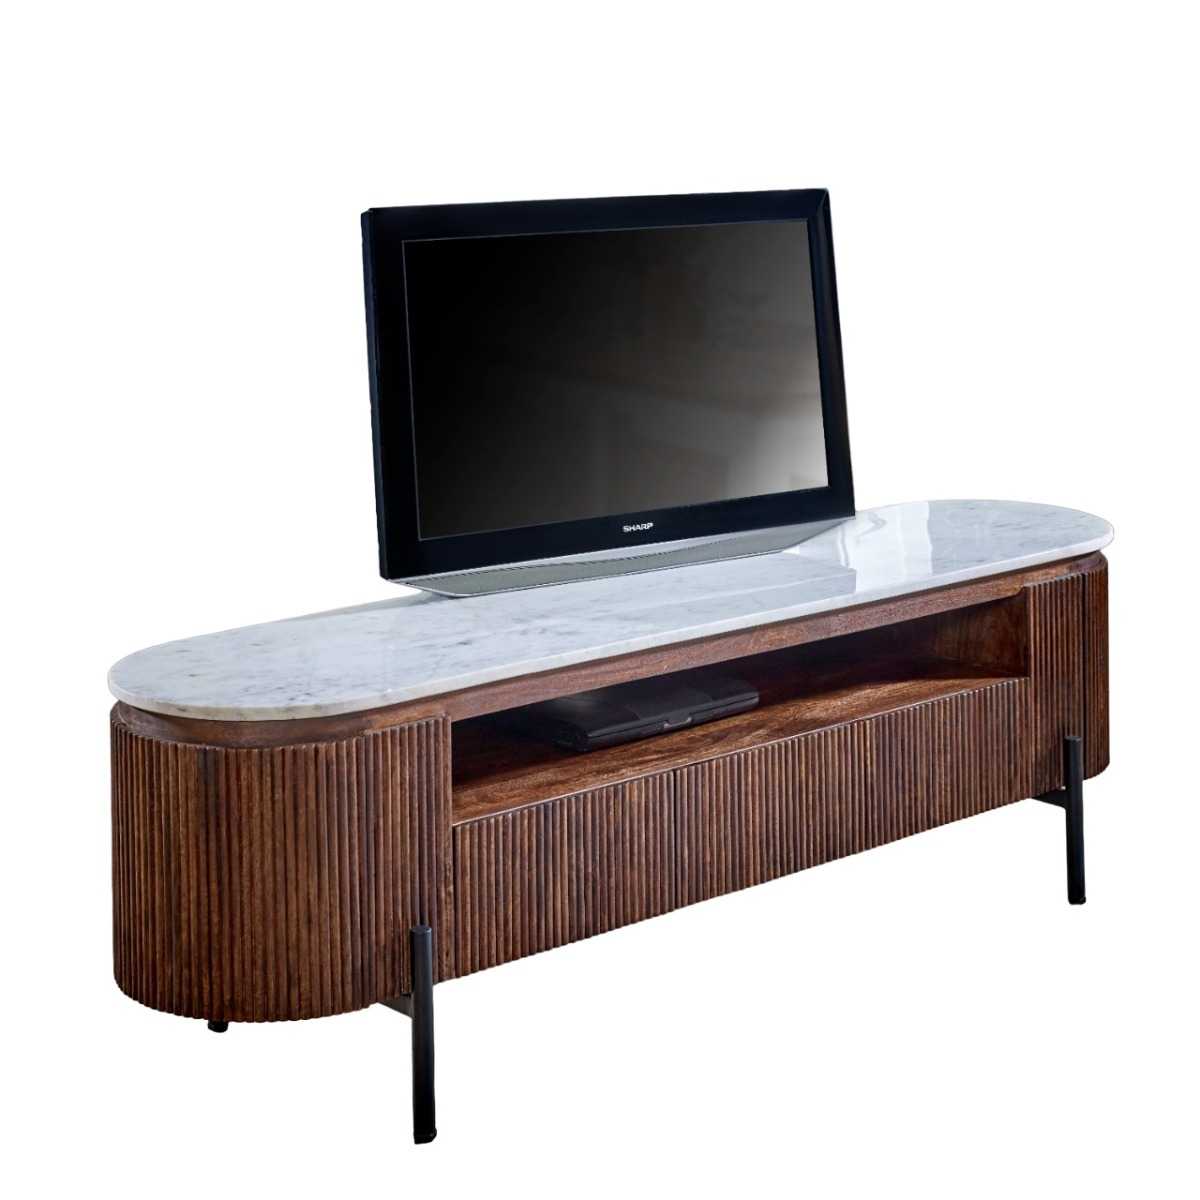 Kelwa handmade solid wood large TV stand with white marble top | malletandplane.com